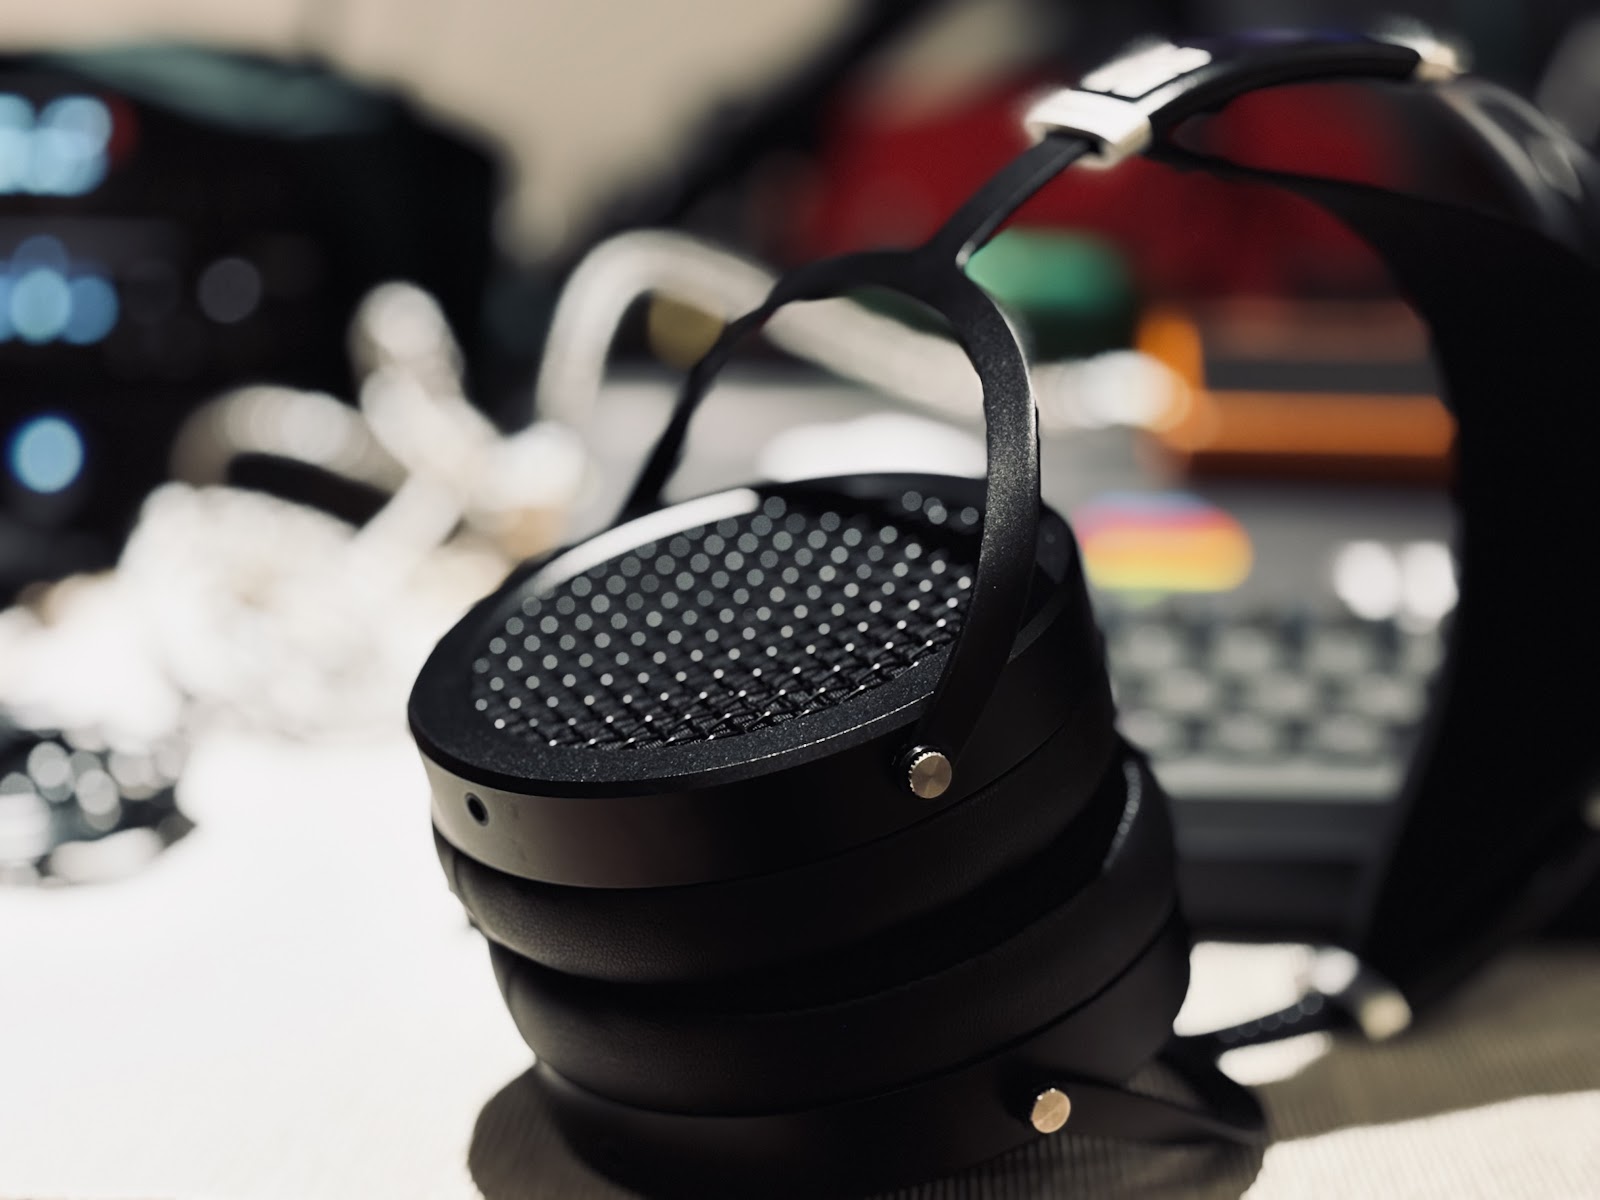 Frequently seen koss porta pro headphone review by influ pinterest